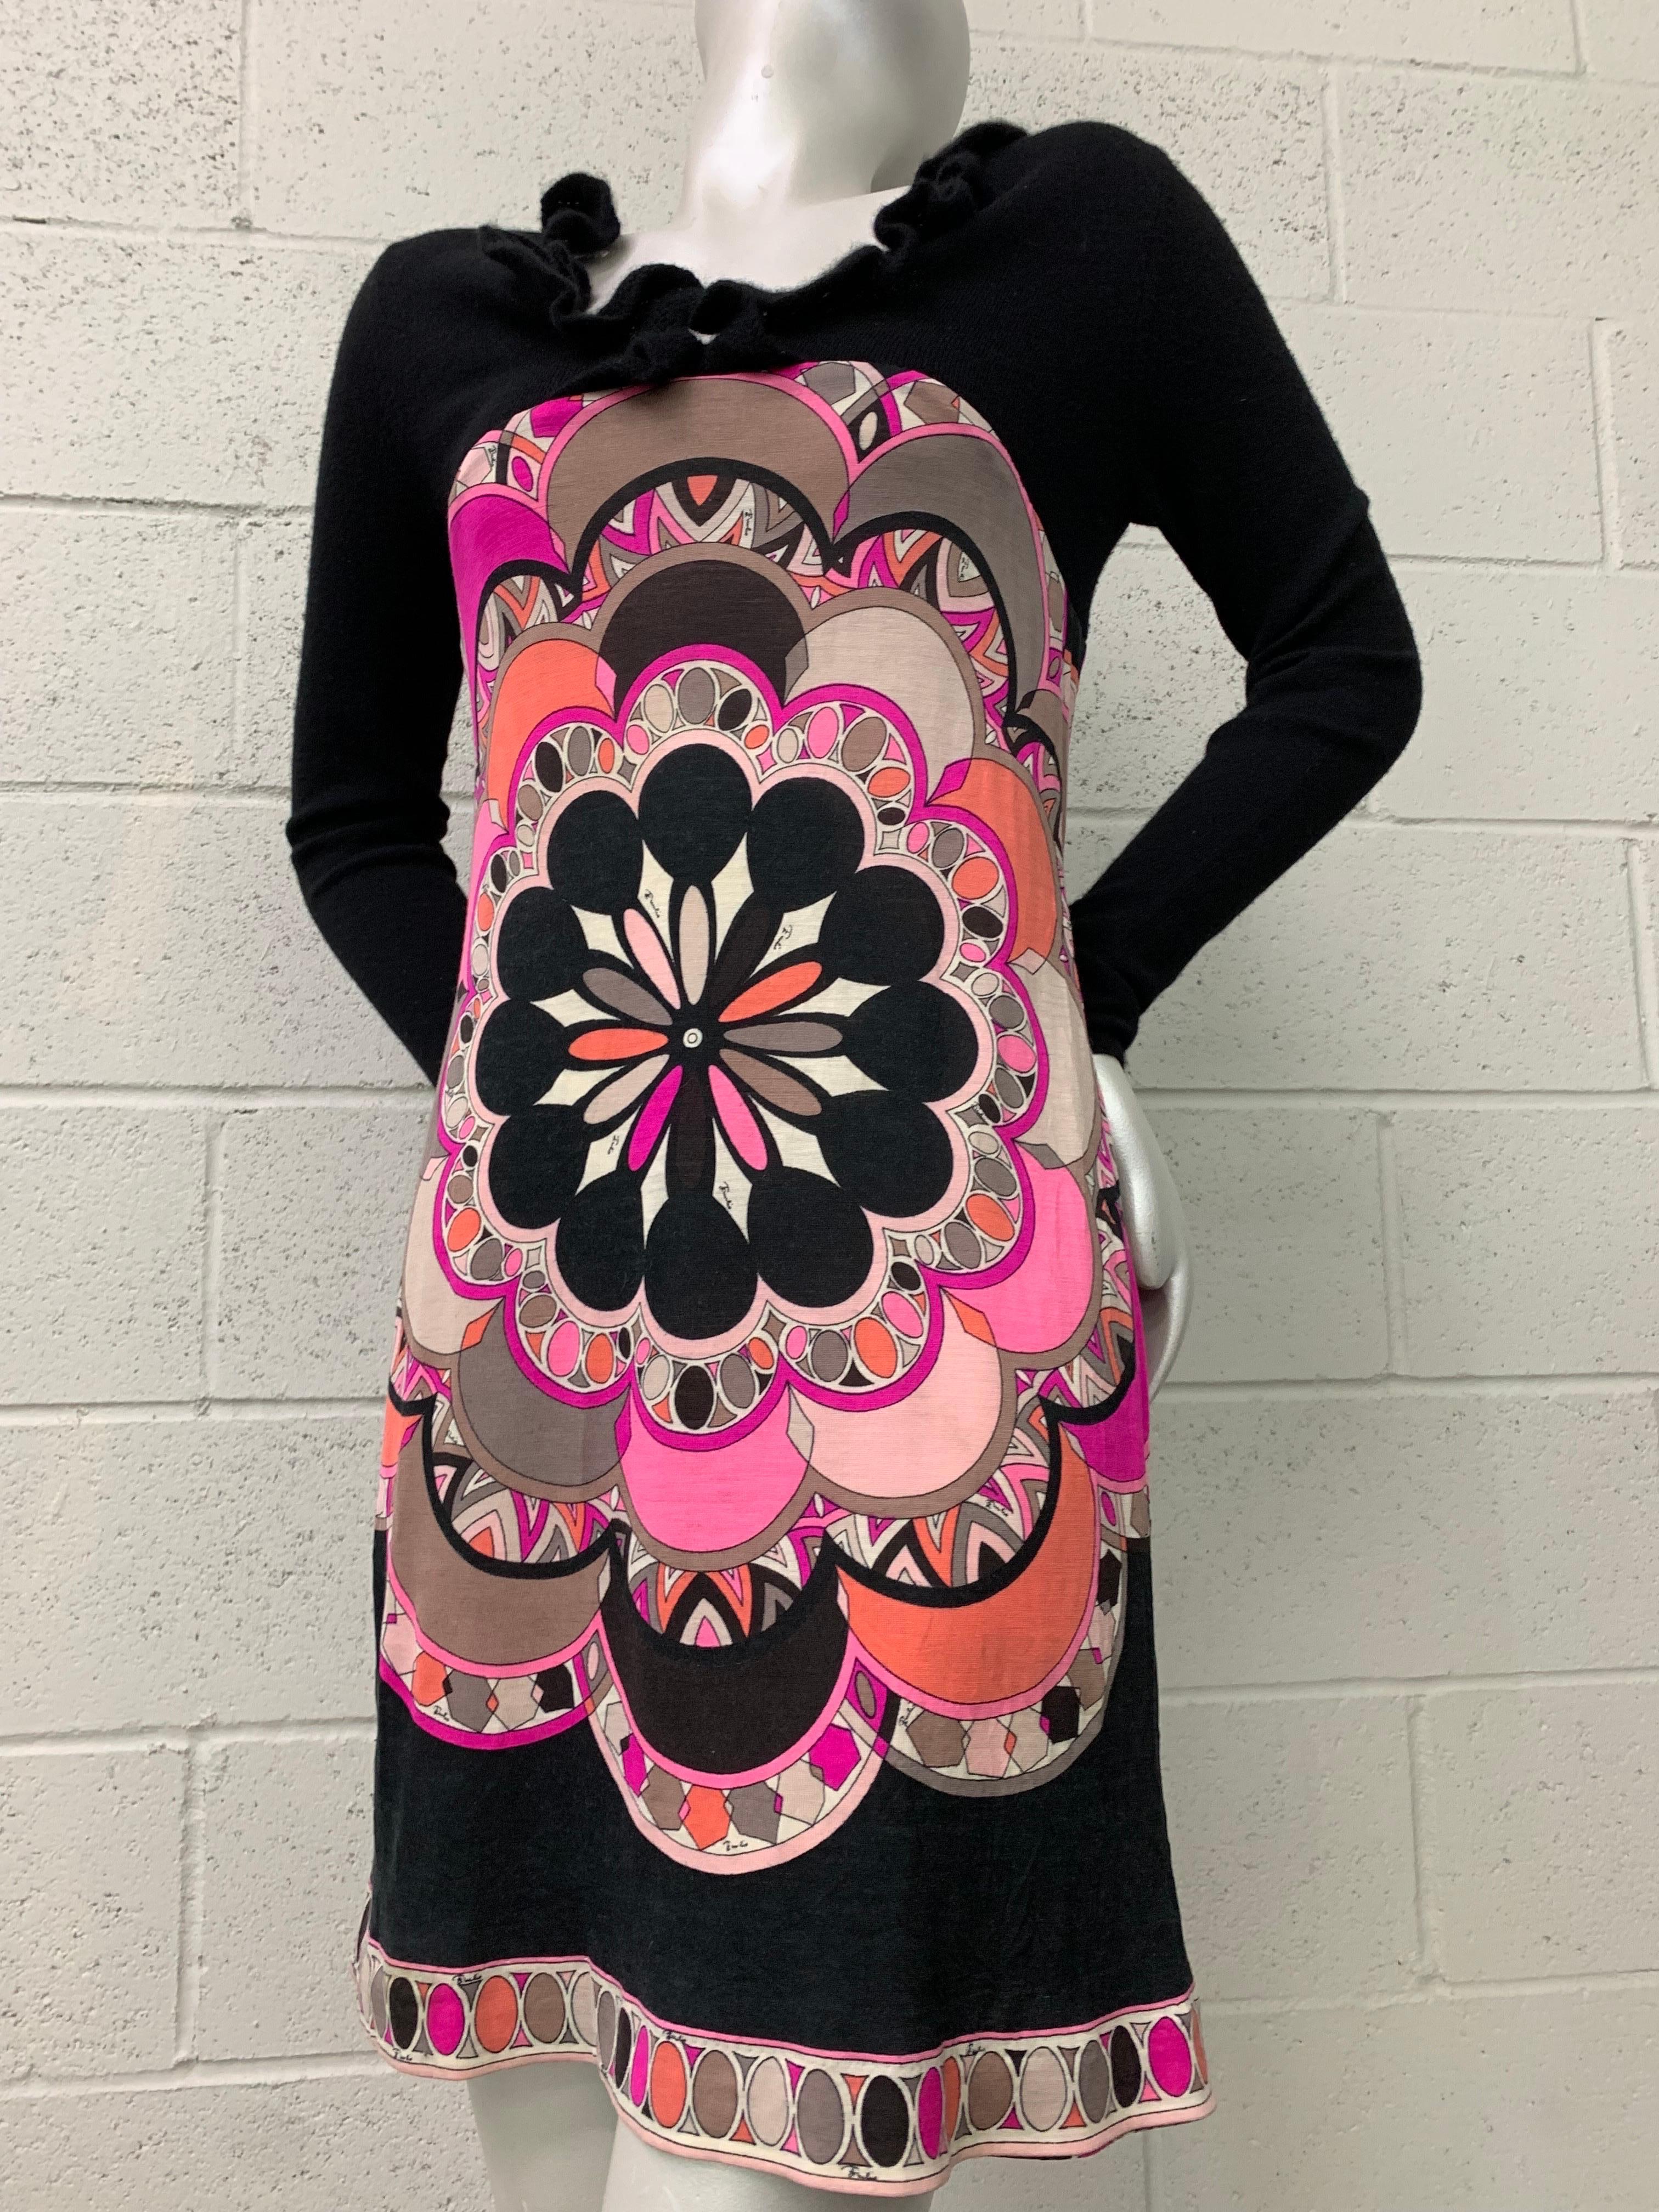 Torso Creations Restyled Pucci 1960s Cashmere Knit Dress W Restyled Cashmere Sweater Top: Ruffled neckline and A-line silhouette slip easy over the head and shoulders. A striking mini dress in a pink, grey and black Mandala design. US size 8. 